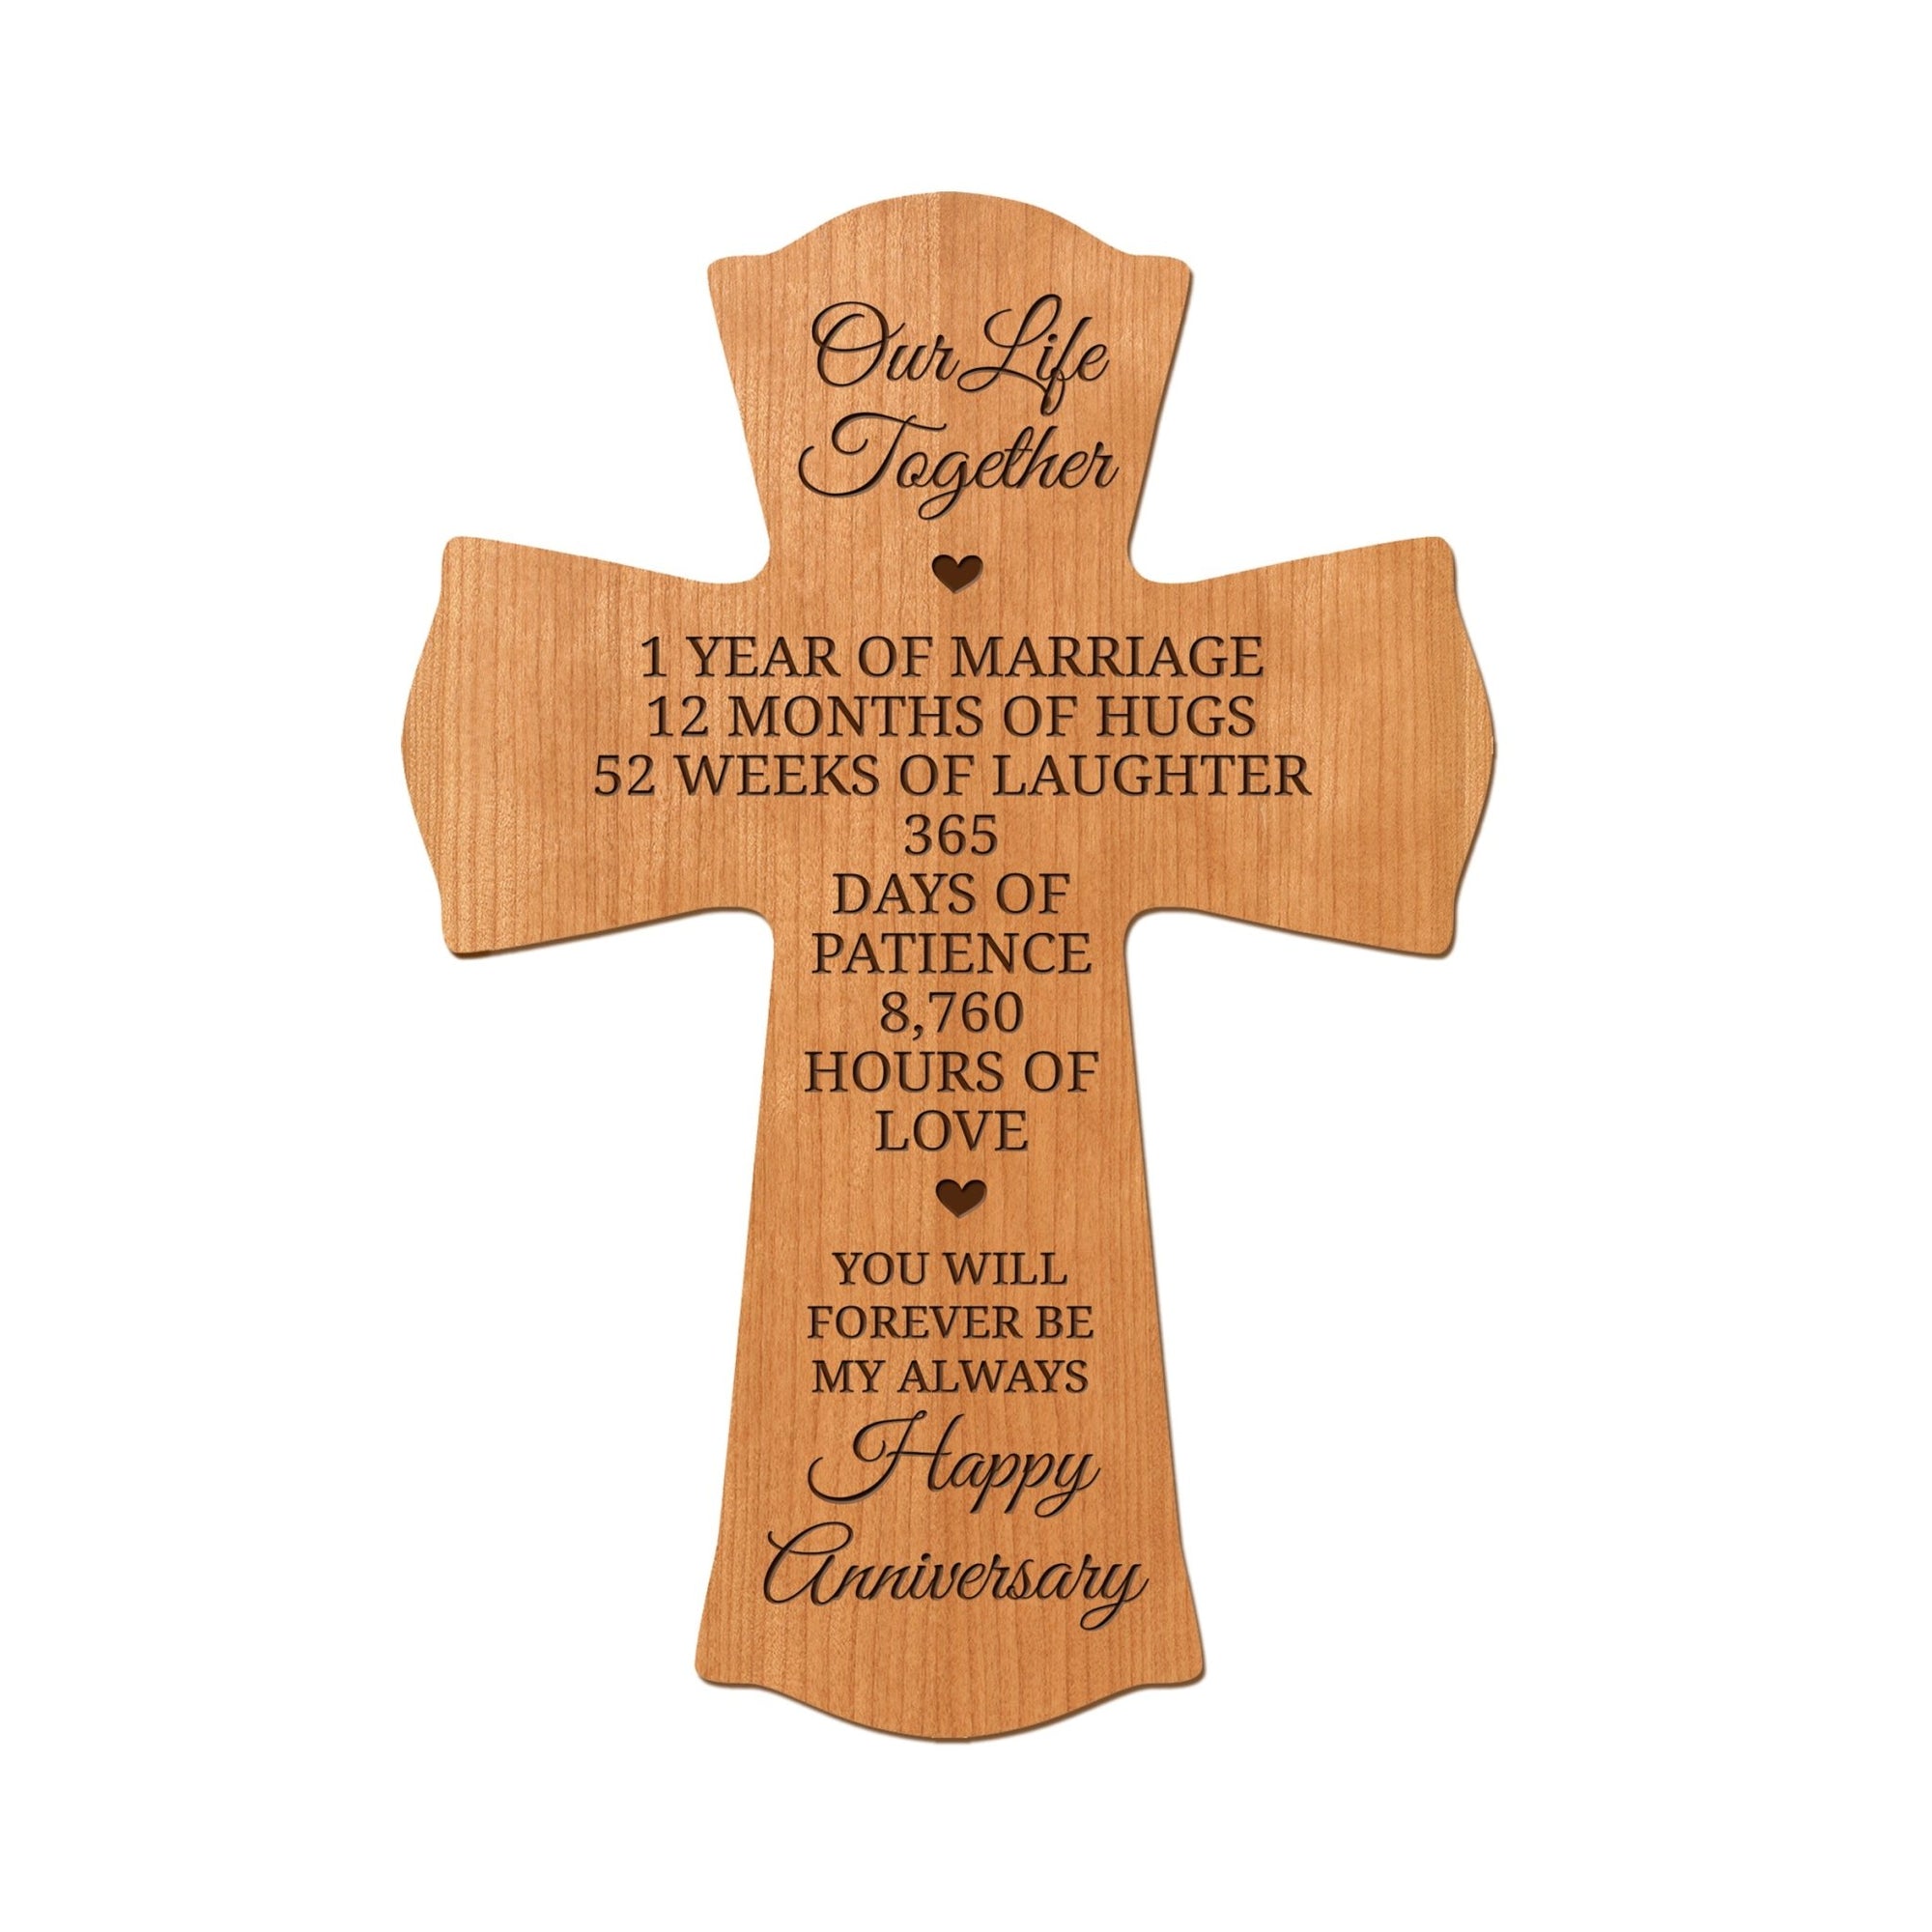 Personalized Wall Cross Gifts for 1st Wedding Anniversary - Our Life Together - LifeSong Milestones